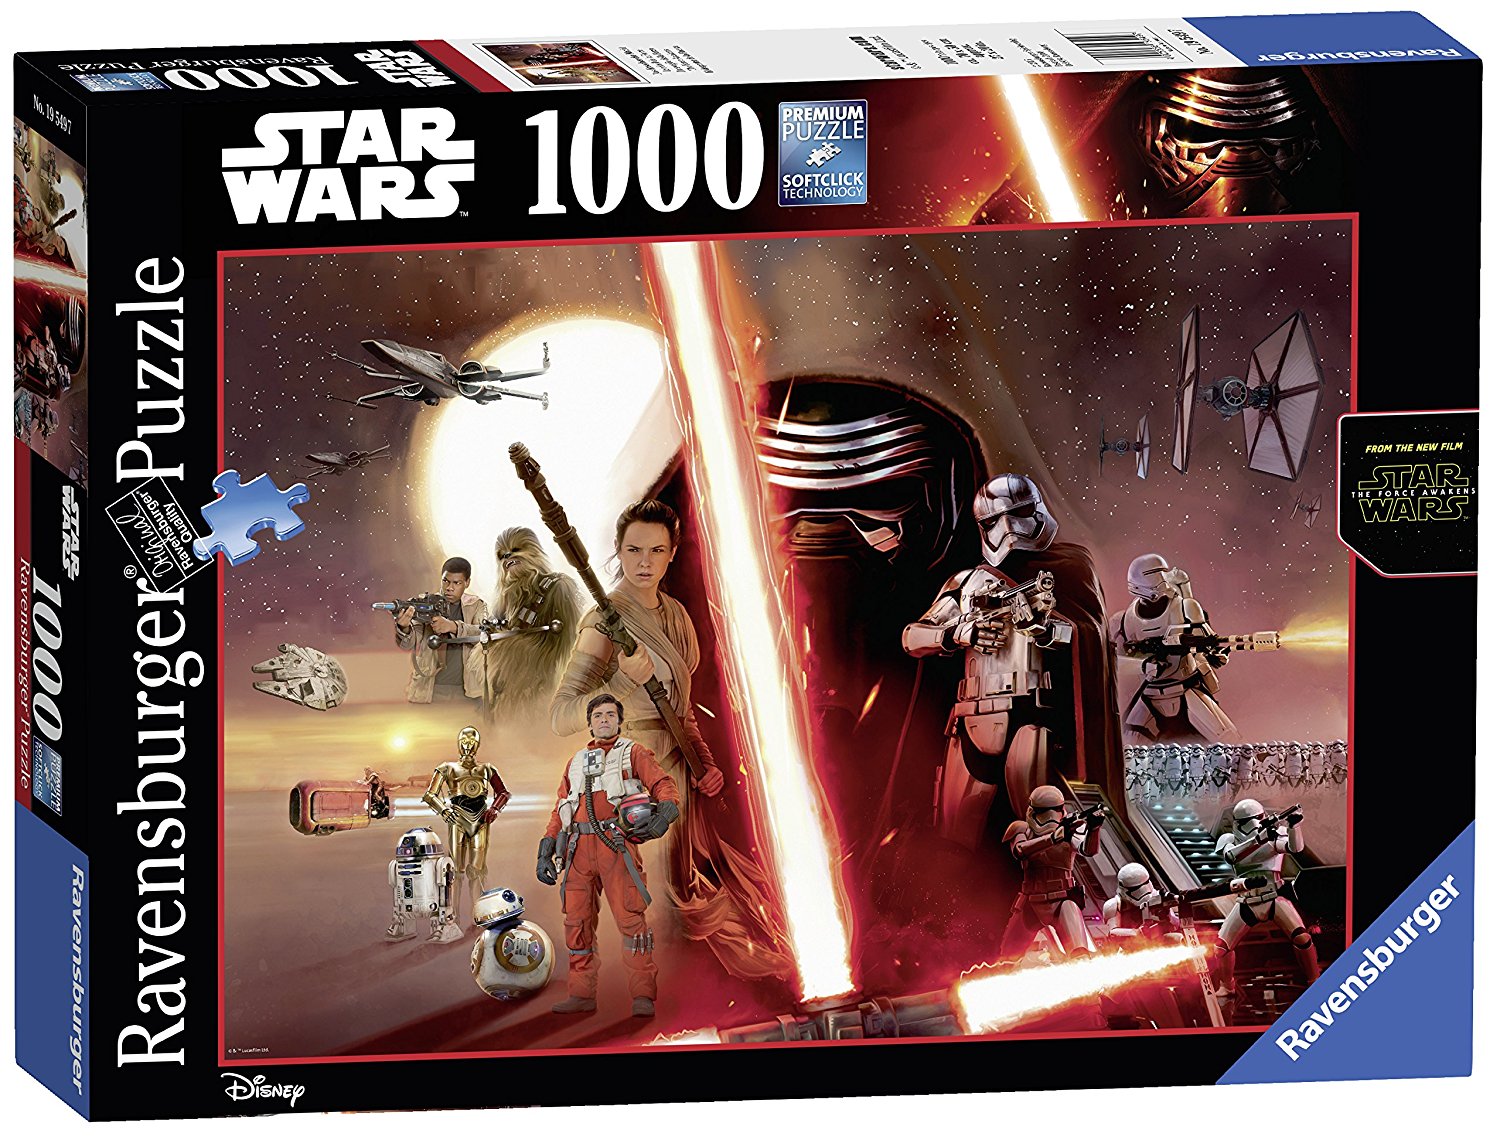 Star Wars Jigsaw Puzzle 1000 Pieces Age 12+ 14989 Ravensburger Challenge 